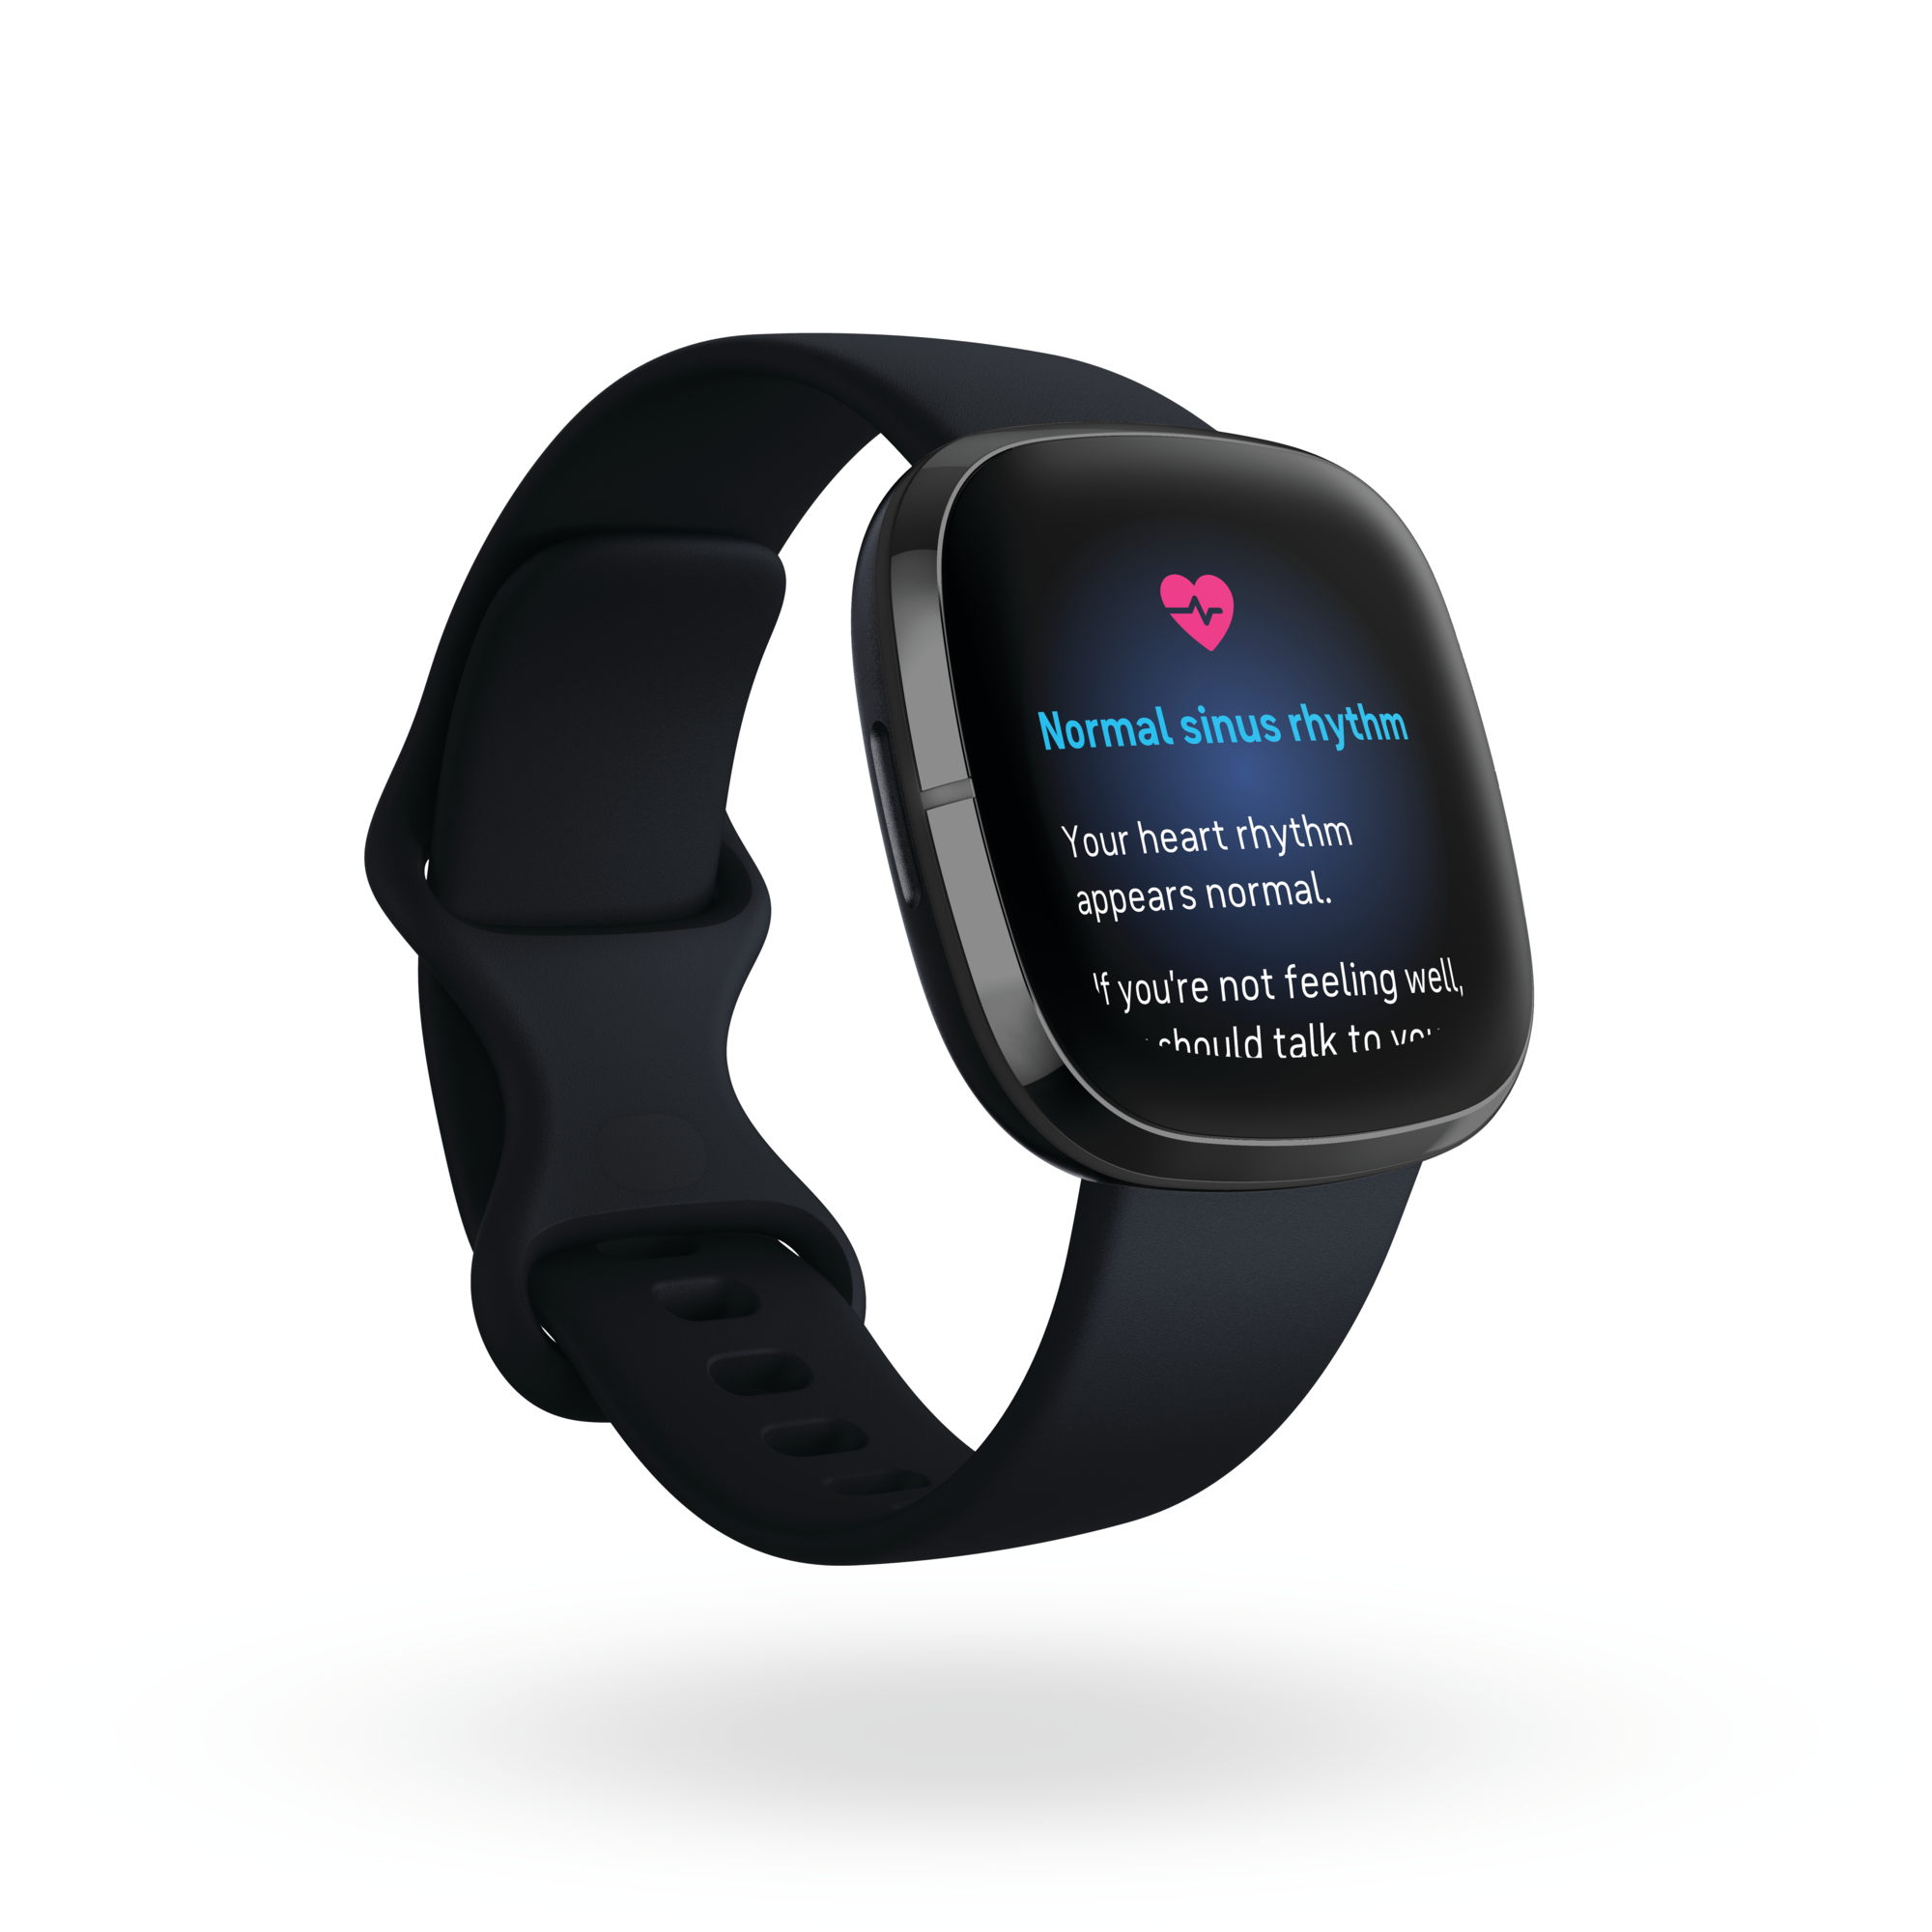 Fitbit Receives Regulatory Clearance in Both the United States and Europe  for ECG App to Identify Atrial Fibrillation (AFib)